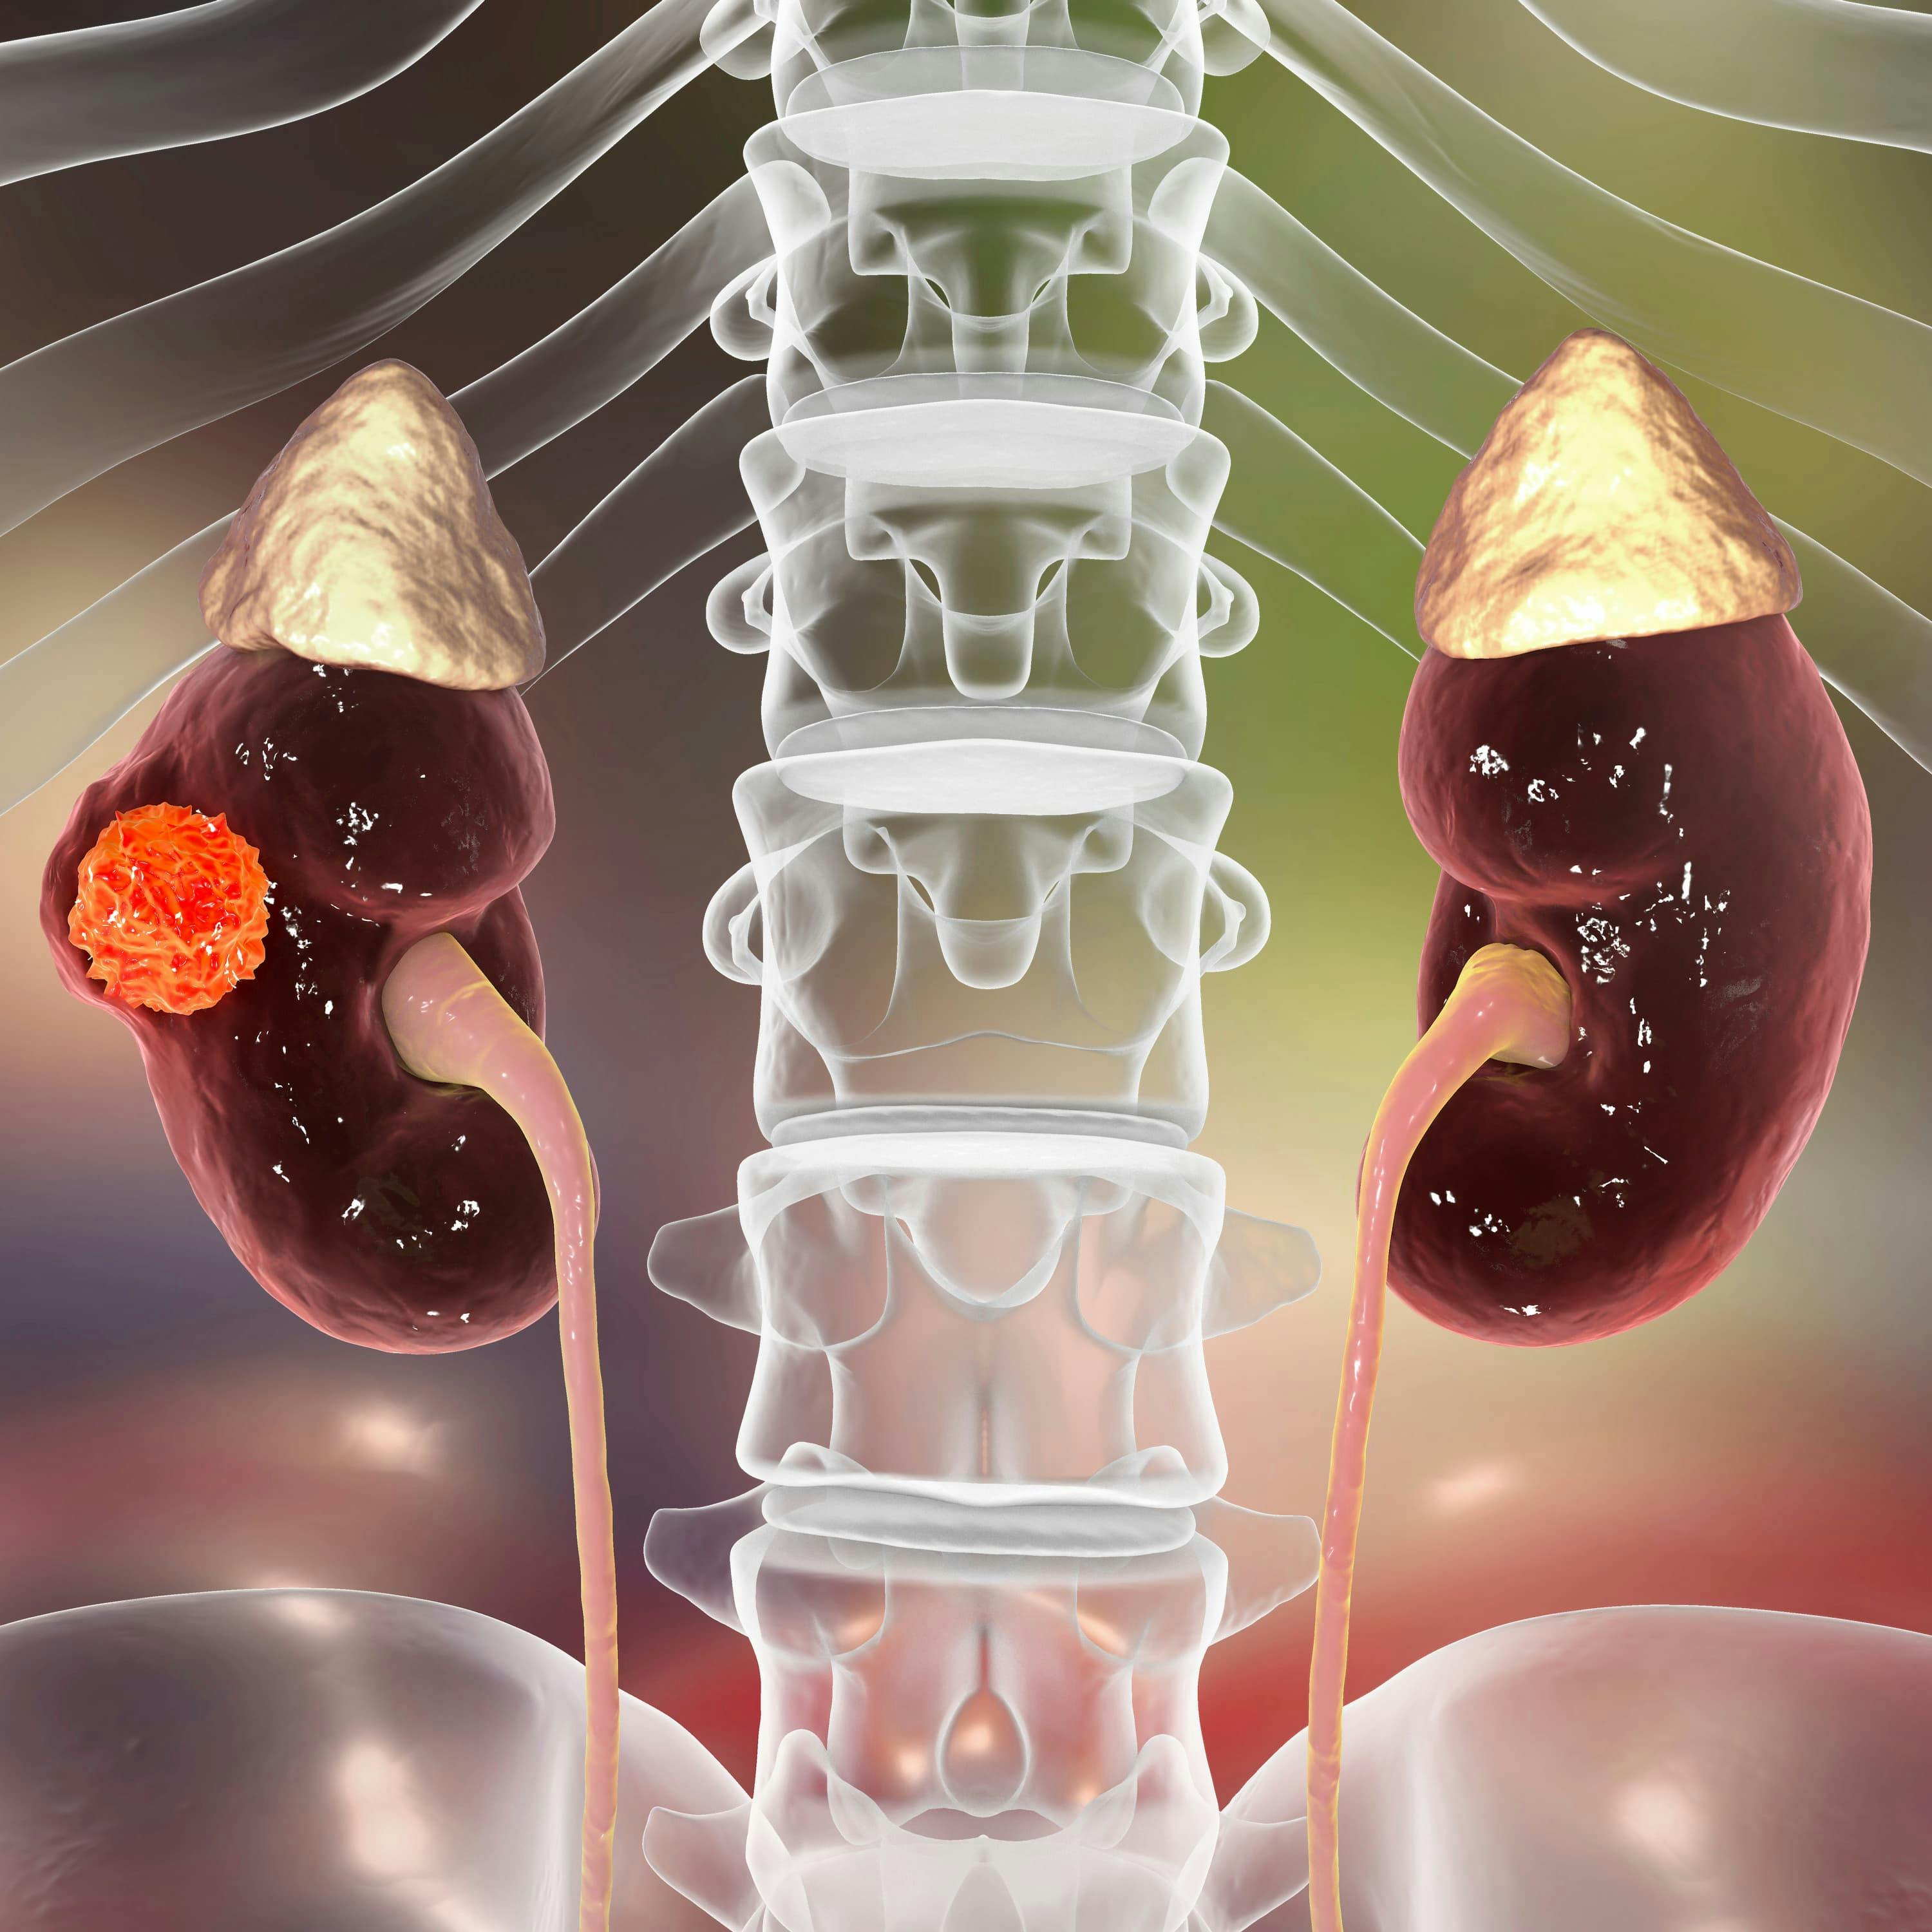 “Decreasing the extent of the IVC [inferior vena cava] thrombus and pathological downstaging with perioperative IO [immuno-oncology]–based therapies improves complexity of nephrectomy,” lead study author Damla Gunenc said.